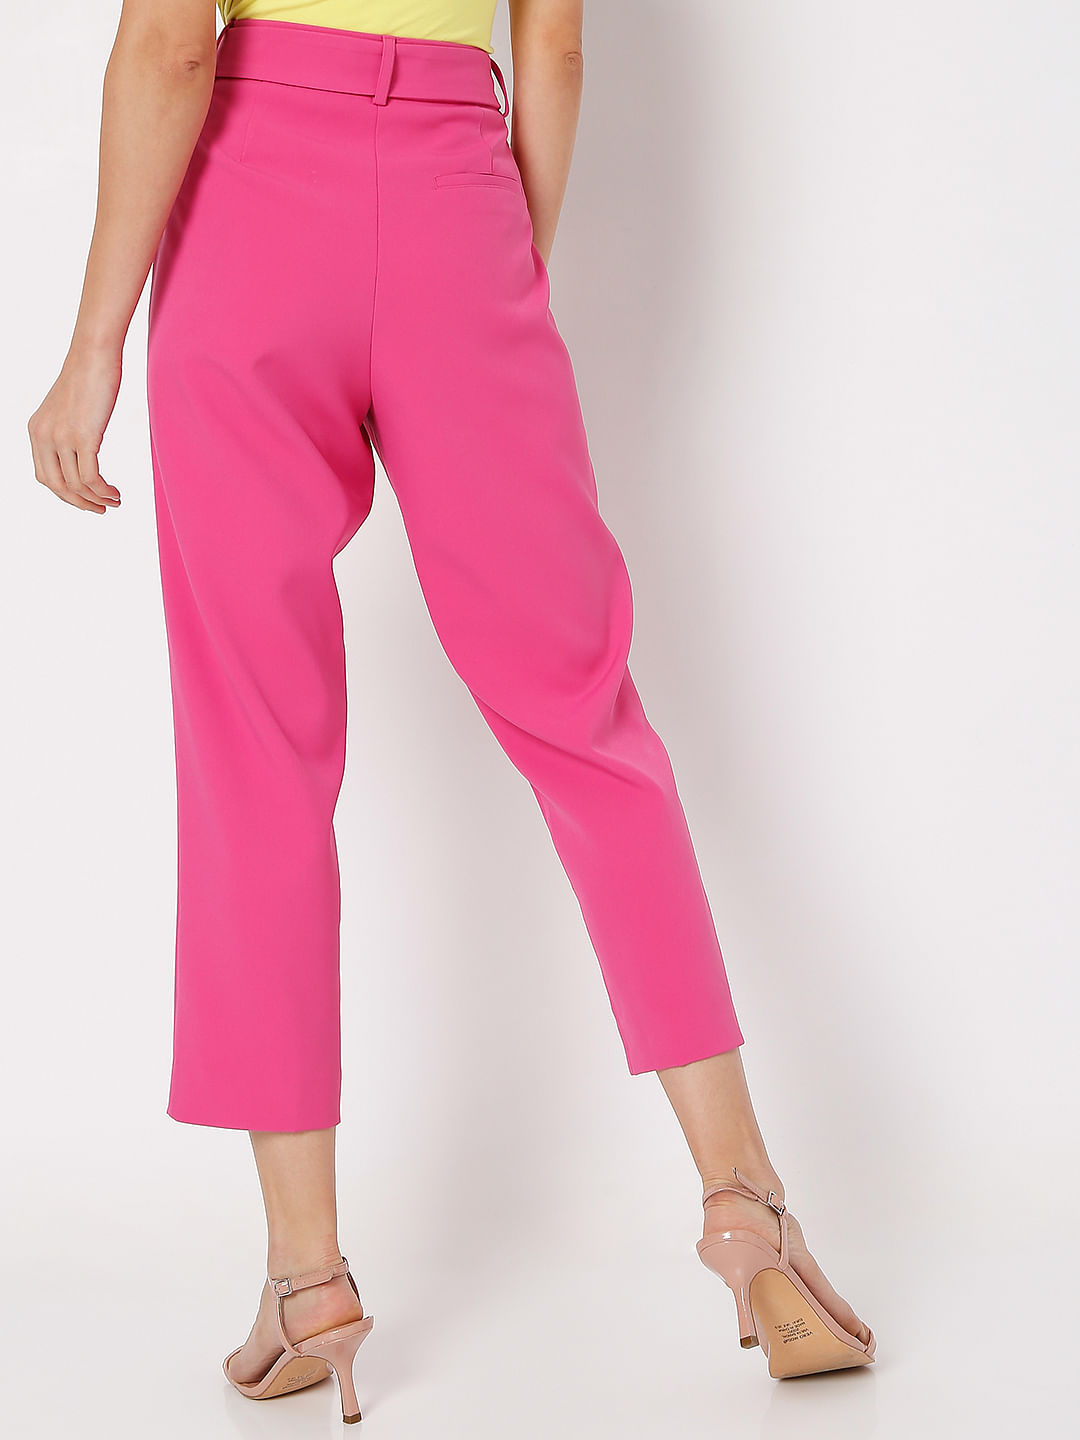 Bonnie Pants - High Waisted Tailored Wide Leg Pants in Pink | Showpo USA